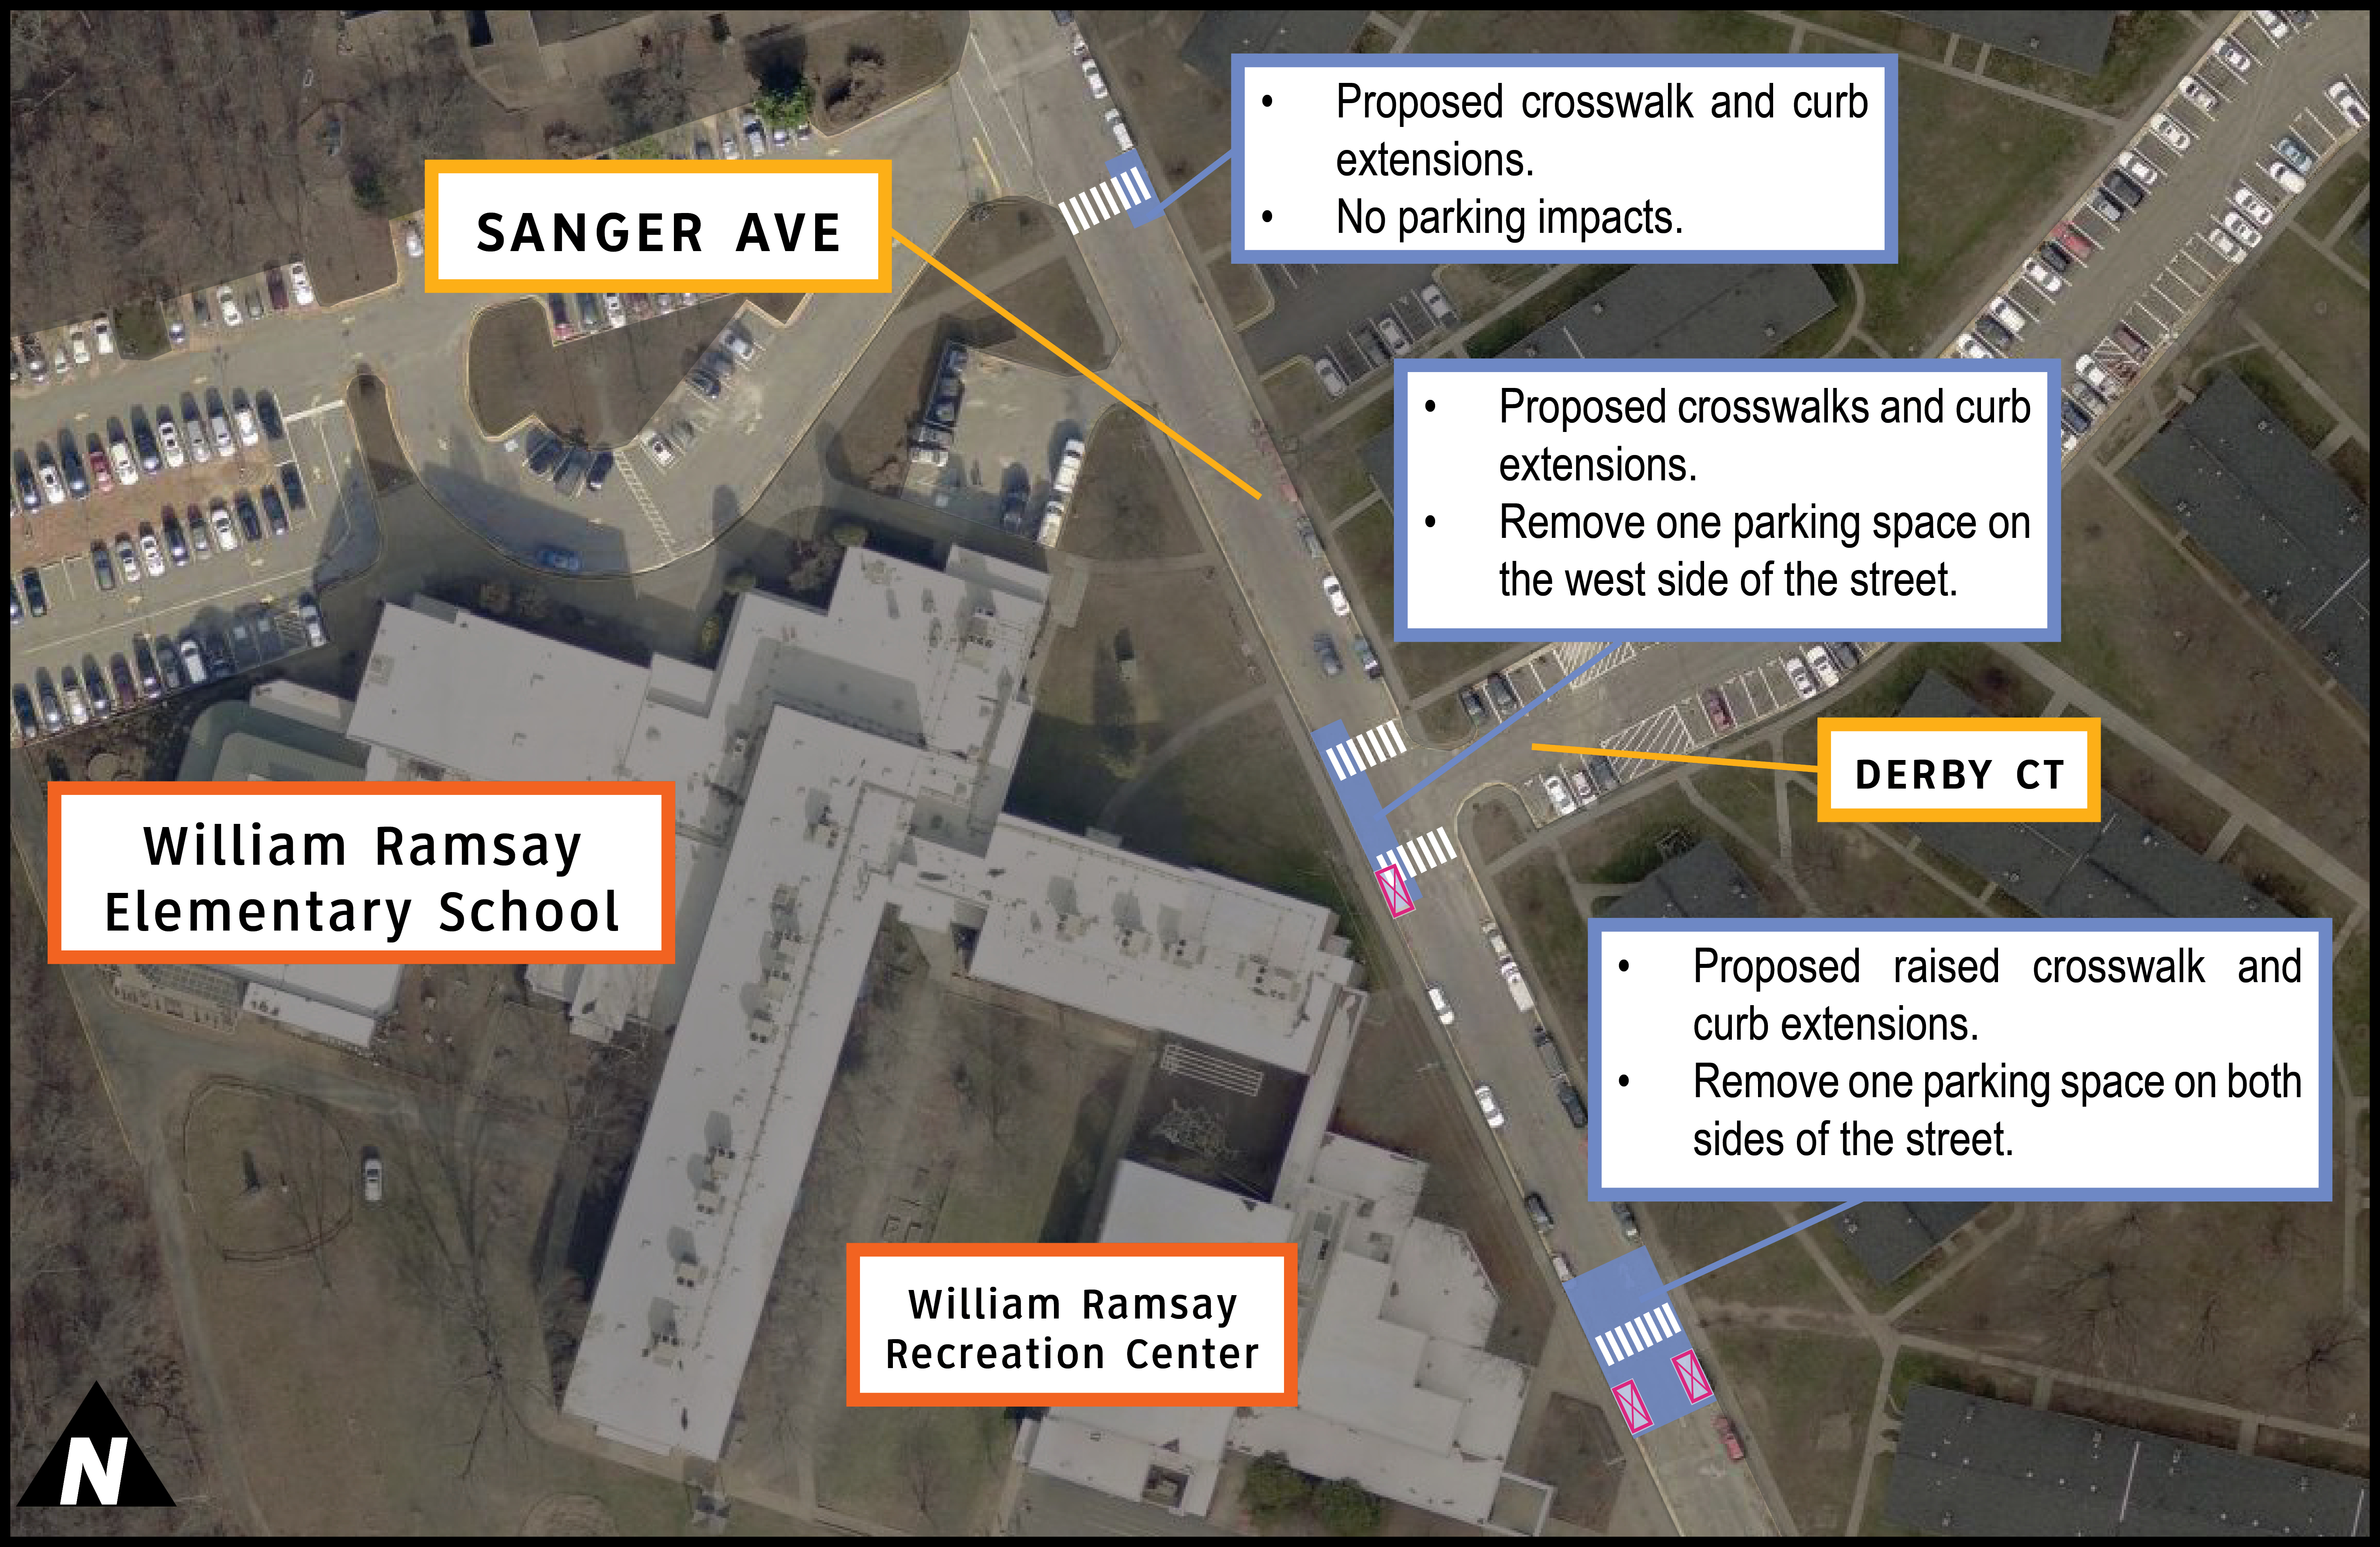 Images shows location of proposed crosswalks, curb extensions, and parking removal.